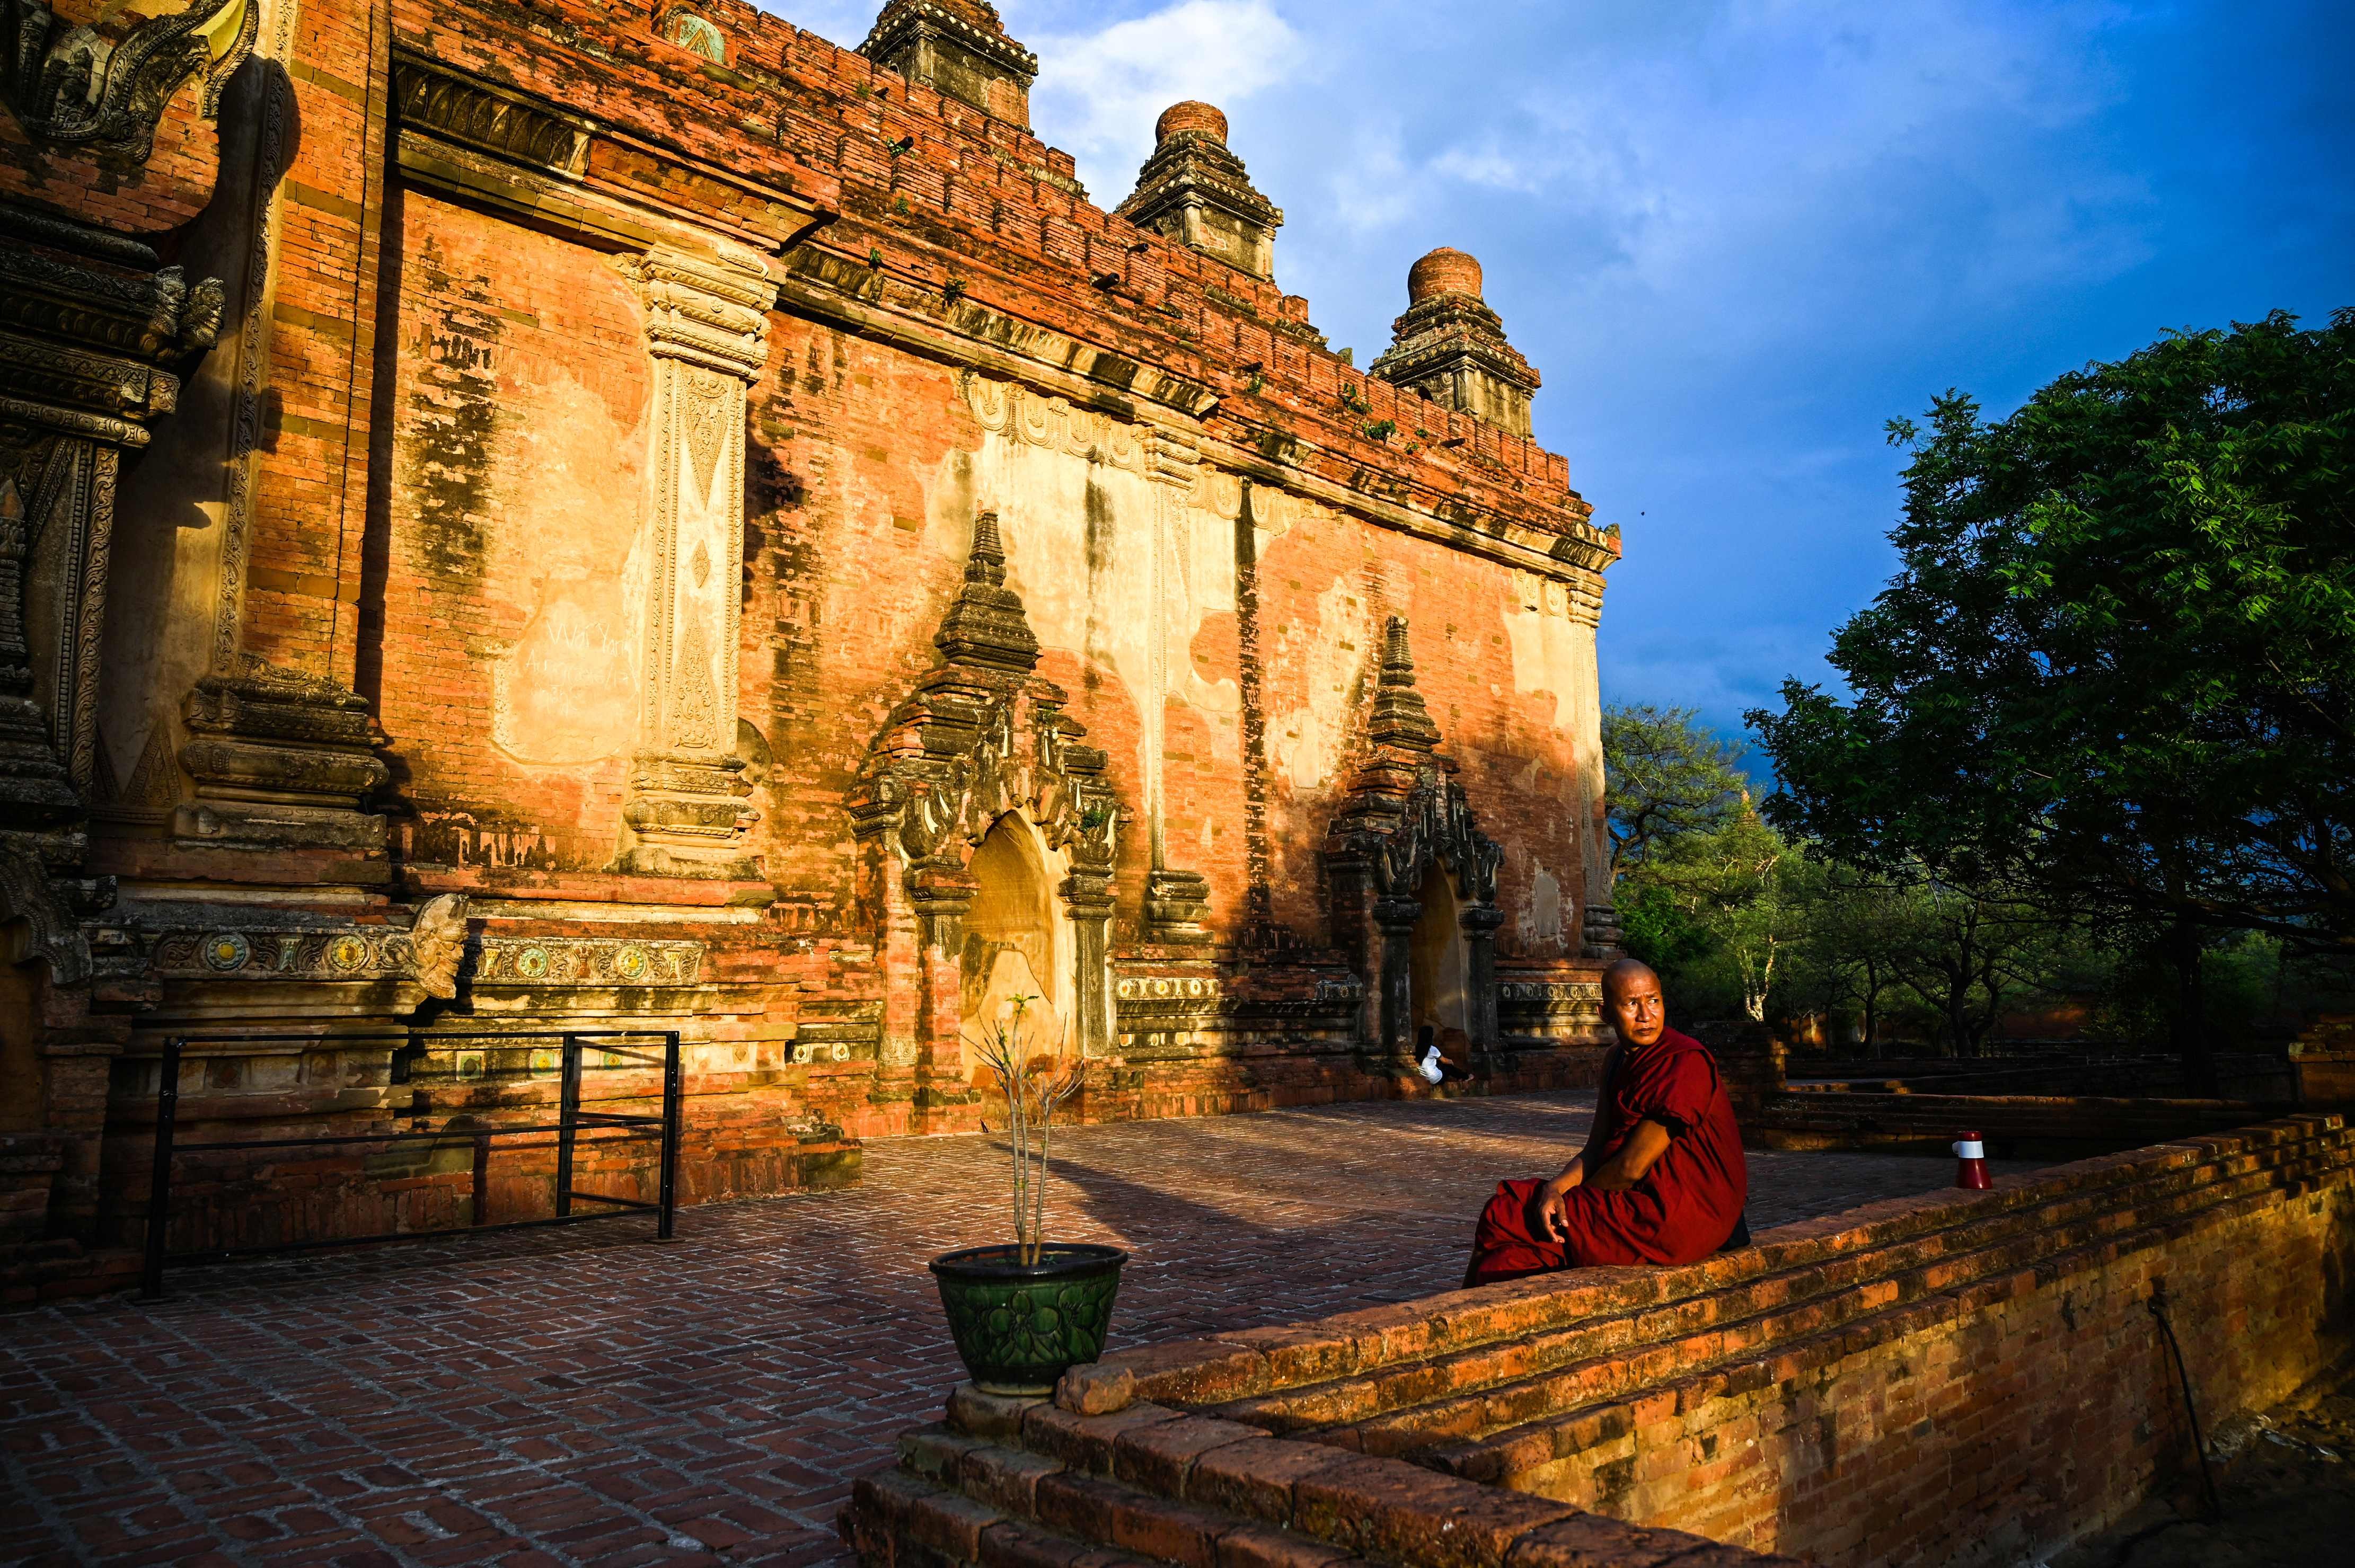 The ancient pagodas in Bagan, Myanmar, are listed as a Unesco World Heritage Site. Photo: AFP